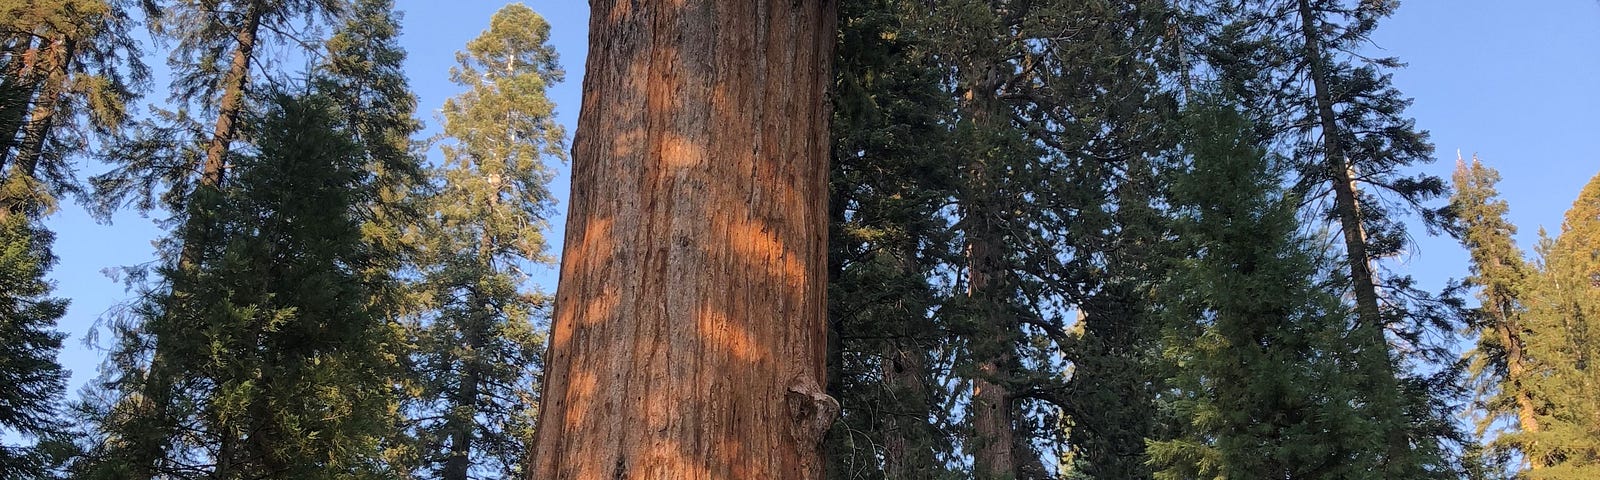 A giant redwood Sequoia tree with people at the base looking like ants